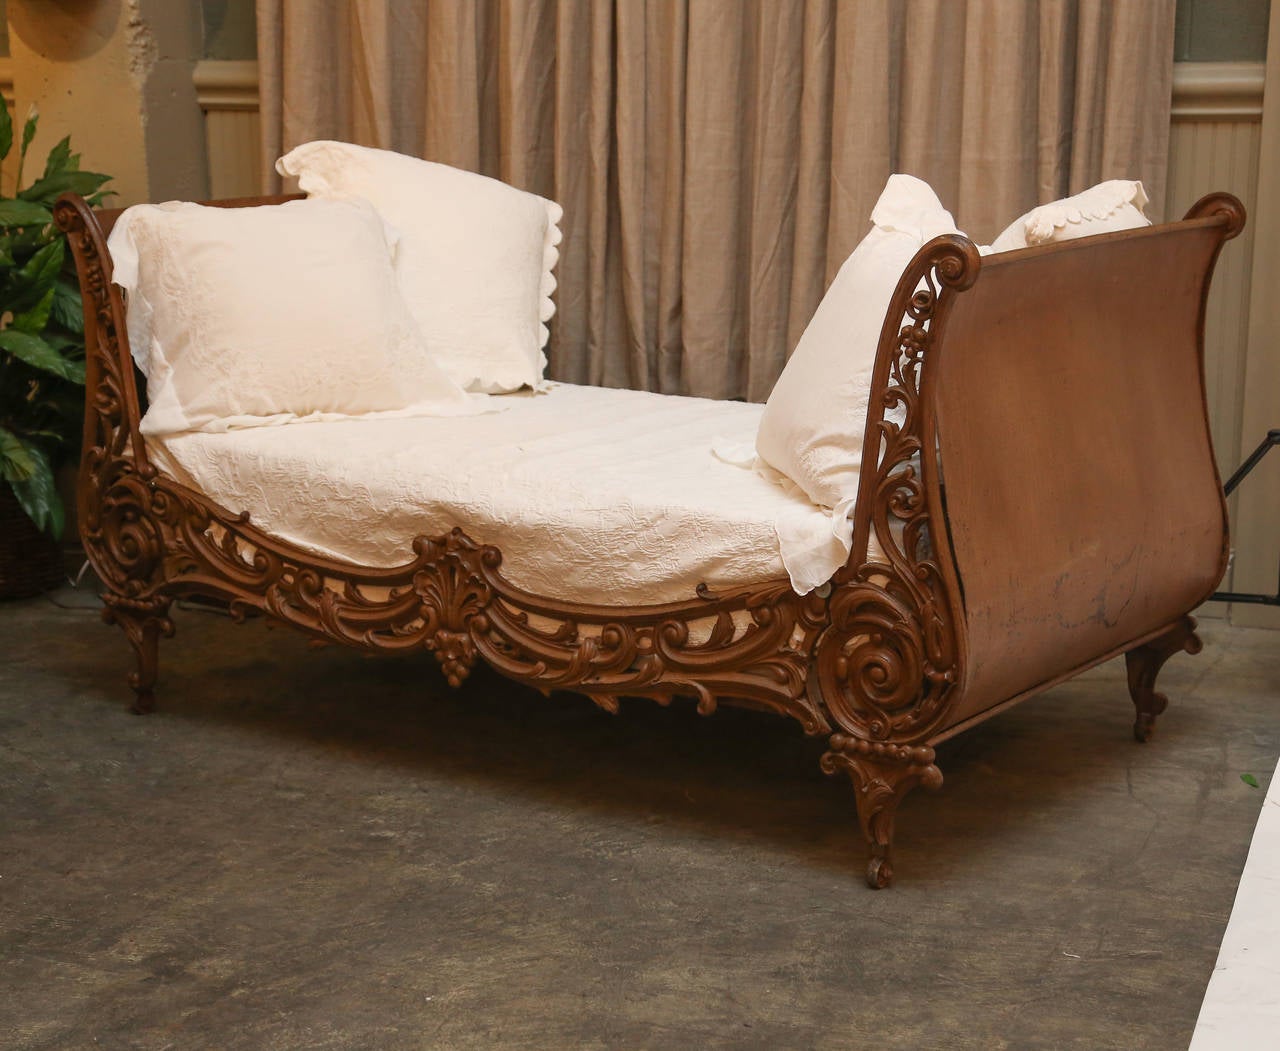 Faux painted sides daybed with cast ornamentation and front rail.

Suitable for many rooms in home, as well as on veranda.

The mattress and boxspring are new and have never been used. 

On casters